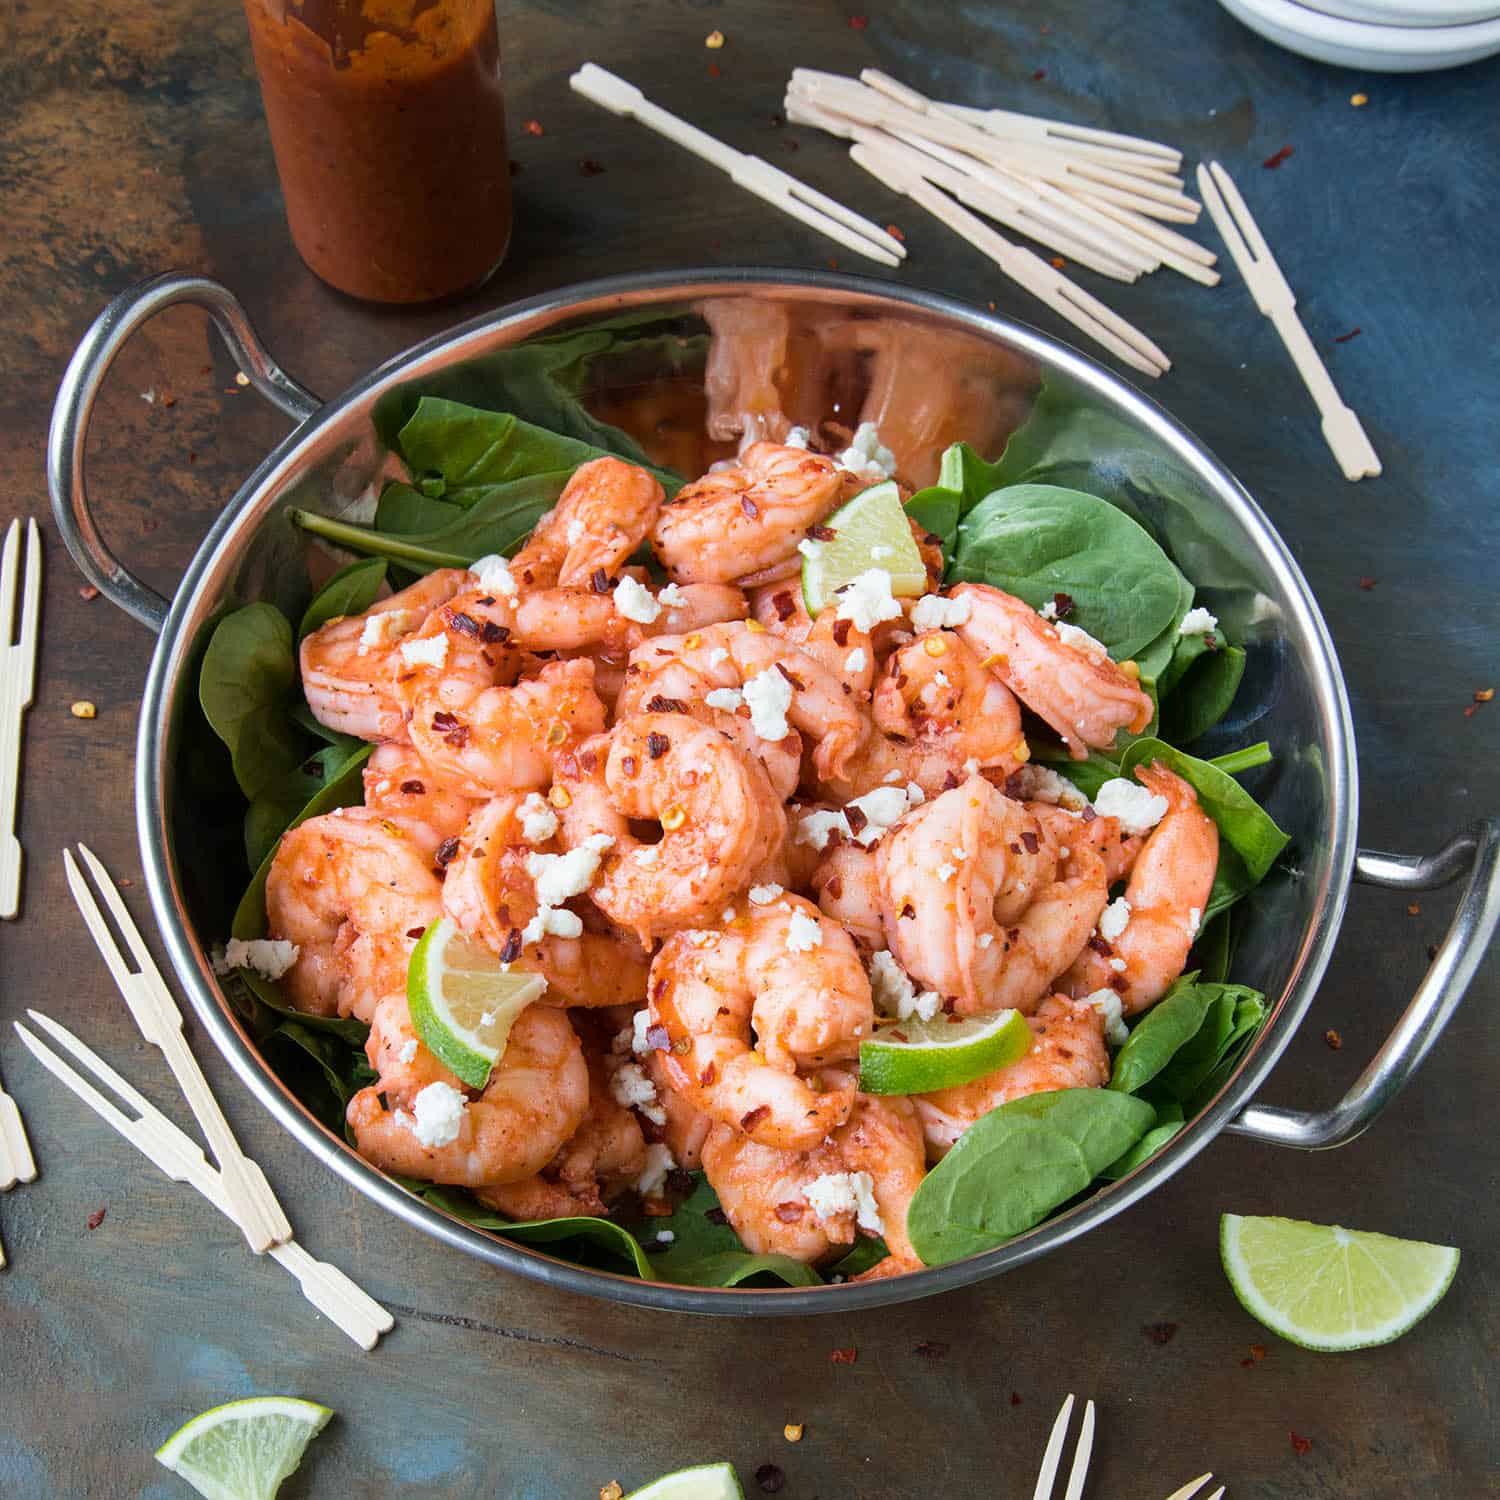 Grilled Buffalo Shrimp in a bowl over spinach leaves - they satisfy everyone.